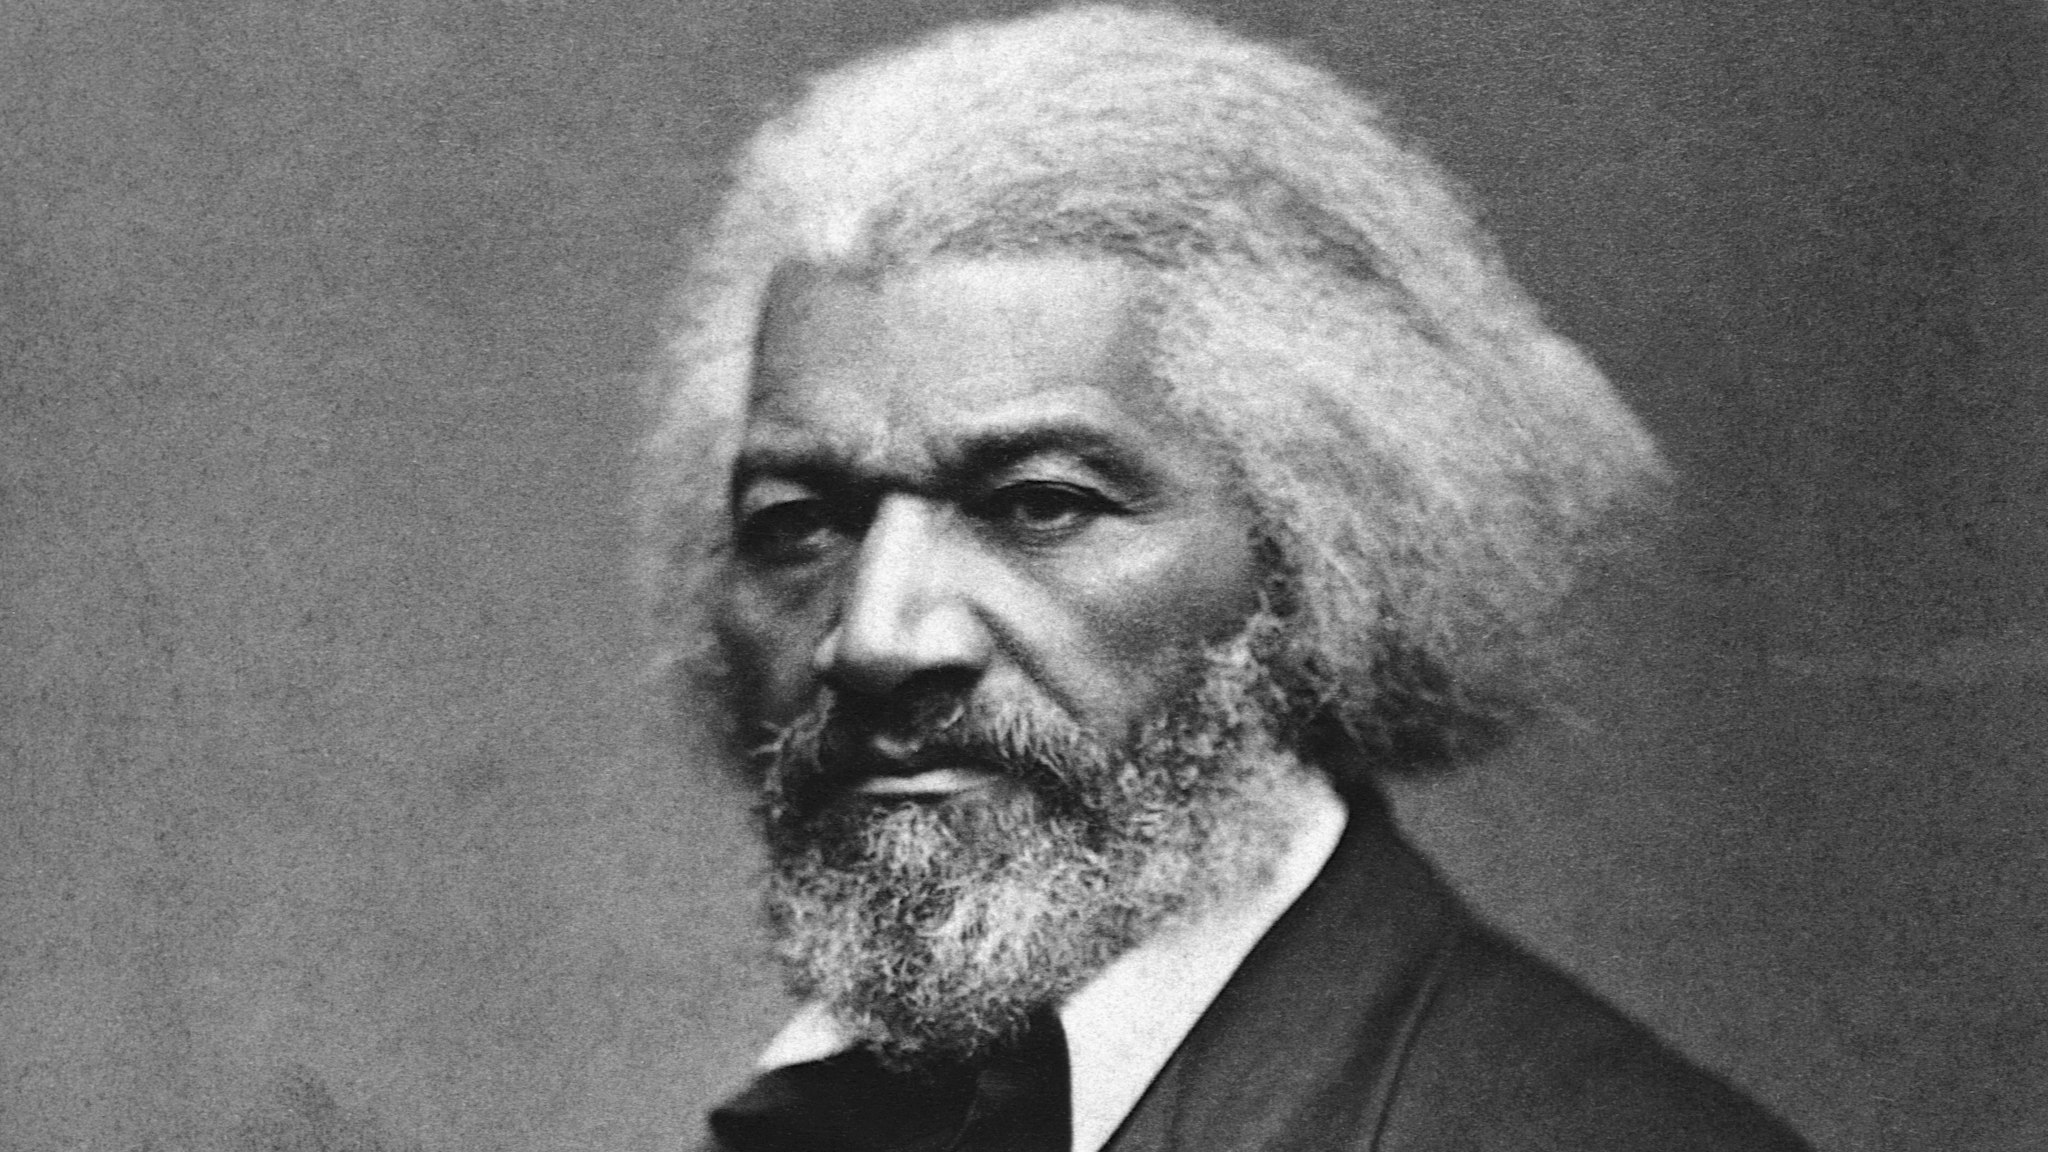 American abolitionist and former slave Frederick Douglass (1817-1895), who helped recruit African-American regiments during the Civil War, ca. 1879.